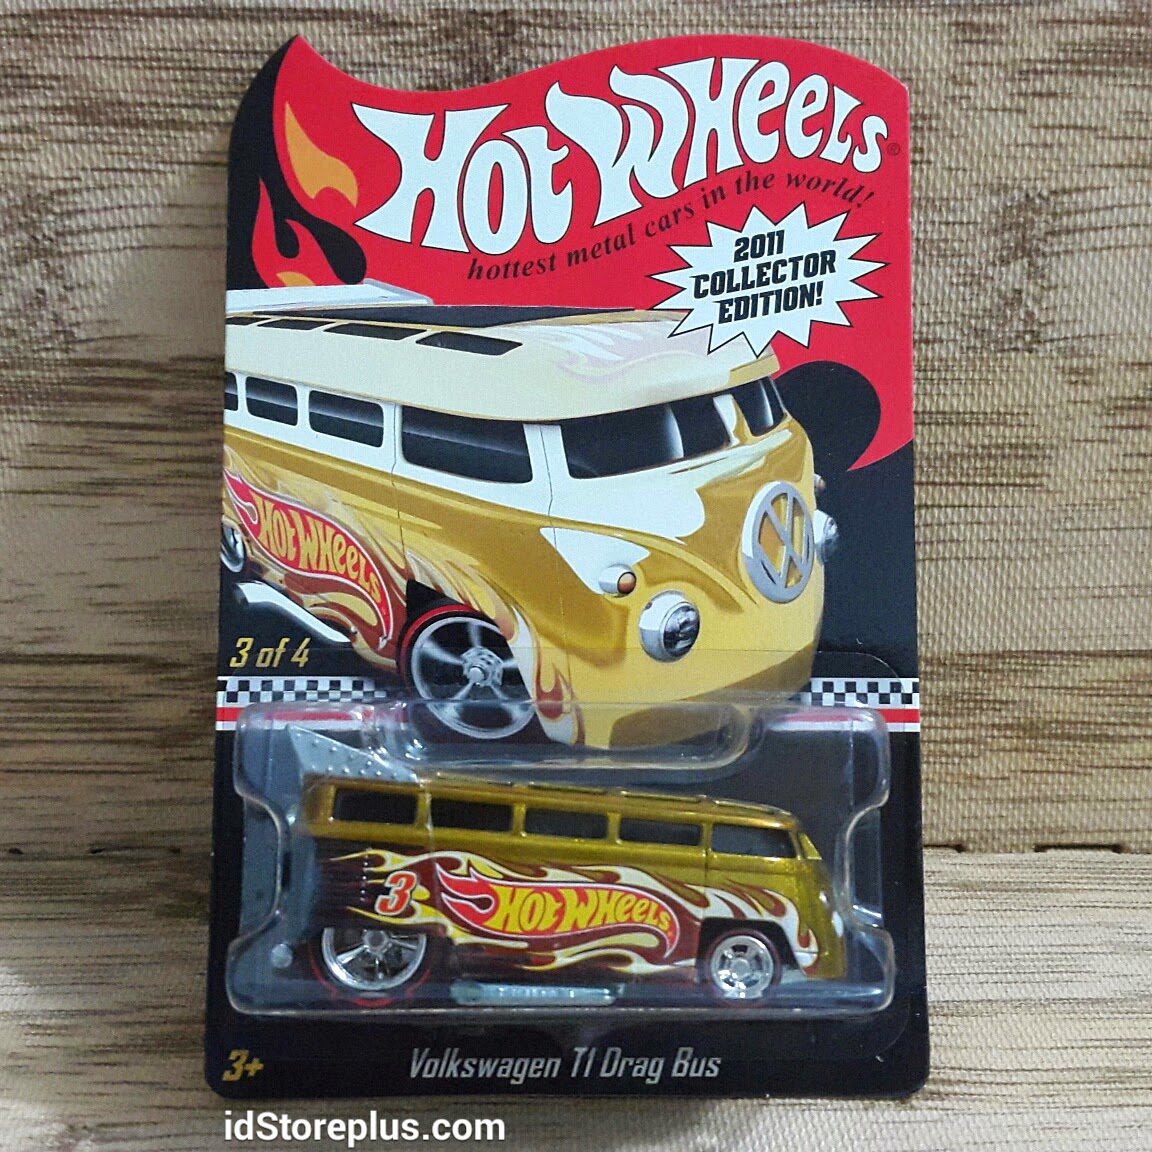 HOT WHEELS 2011 VOLKSWAGEN T1 DRAG BUS GOLD COLLECTOR EDITION 3 OF 4